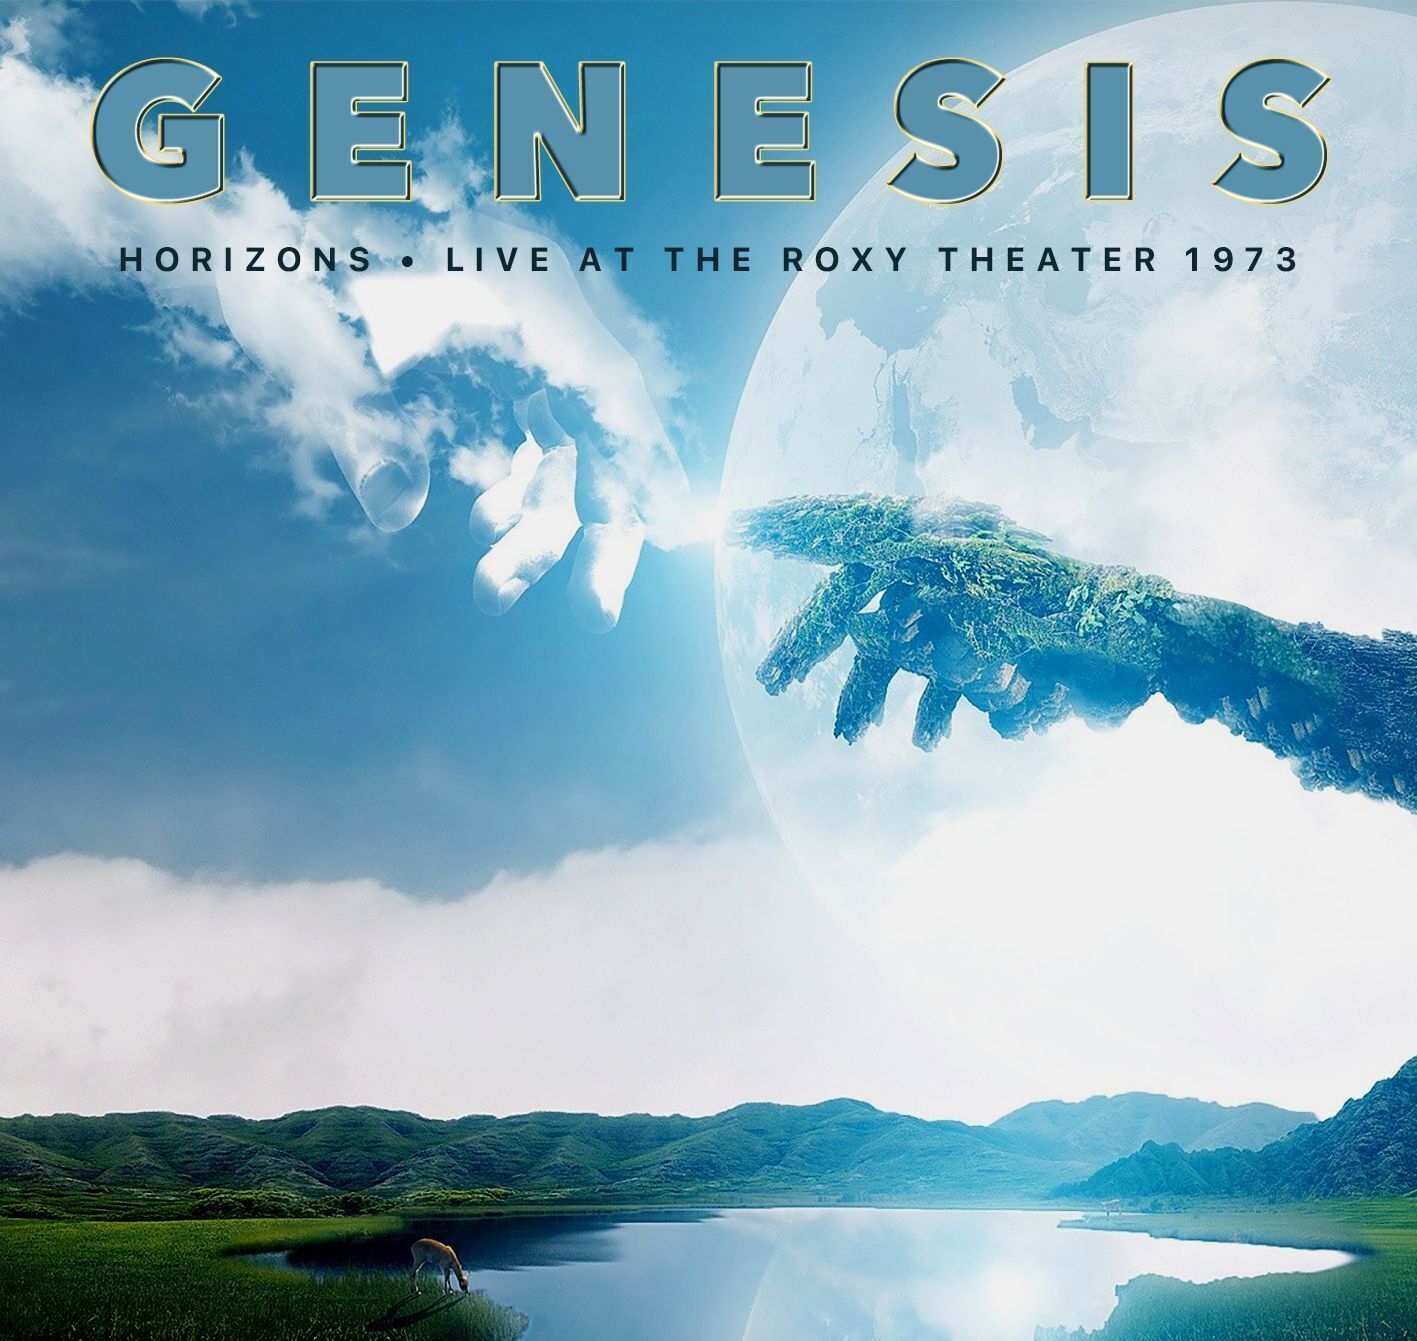 Genesis Horzons: Live at the Roxy Theater 1973 (CD) Album (UK IMPORT)